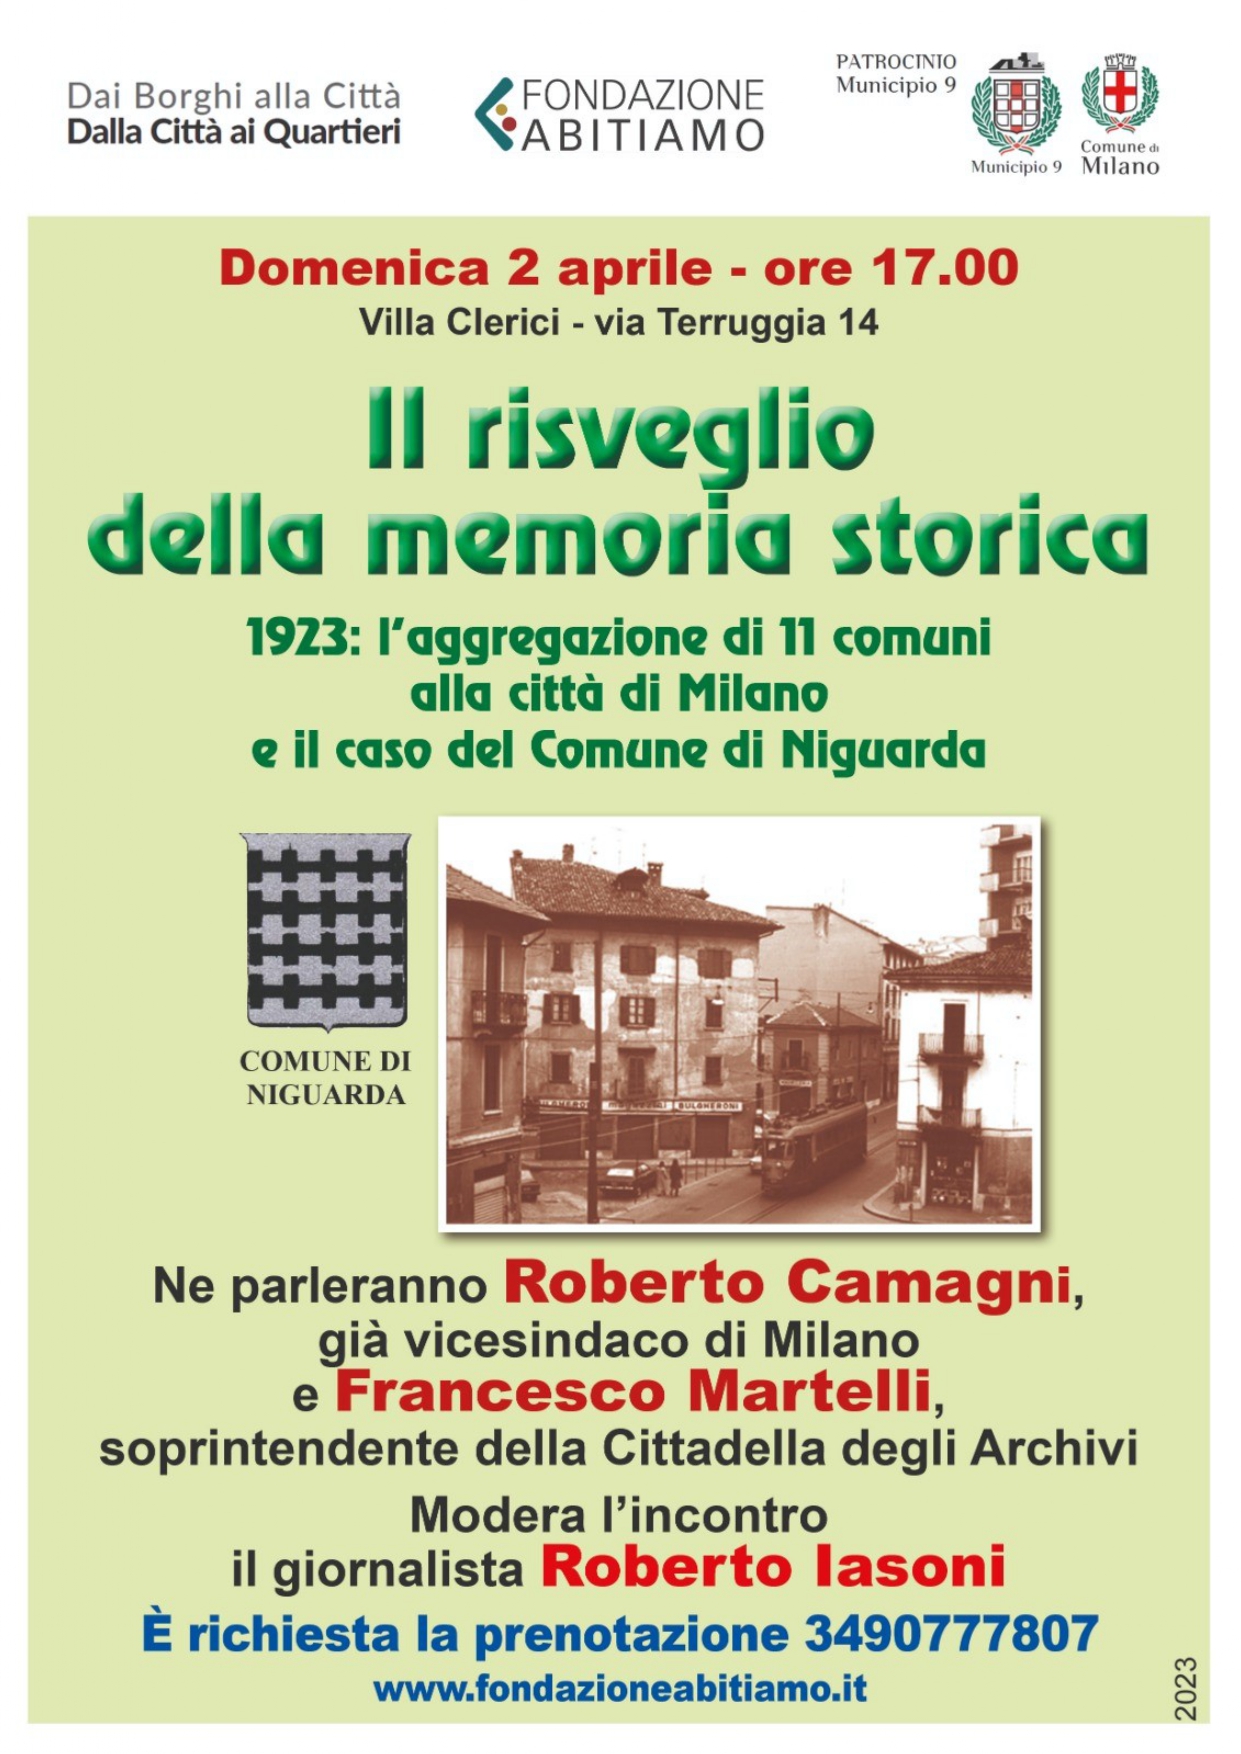 The awakening of historical memory - Meeting in Town Hall 9